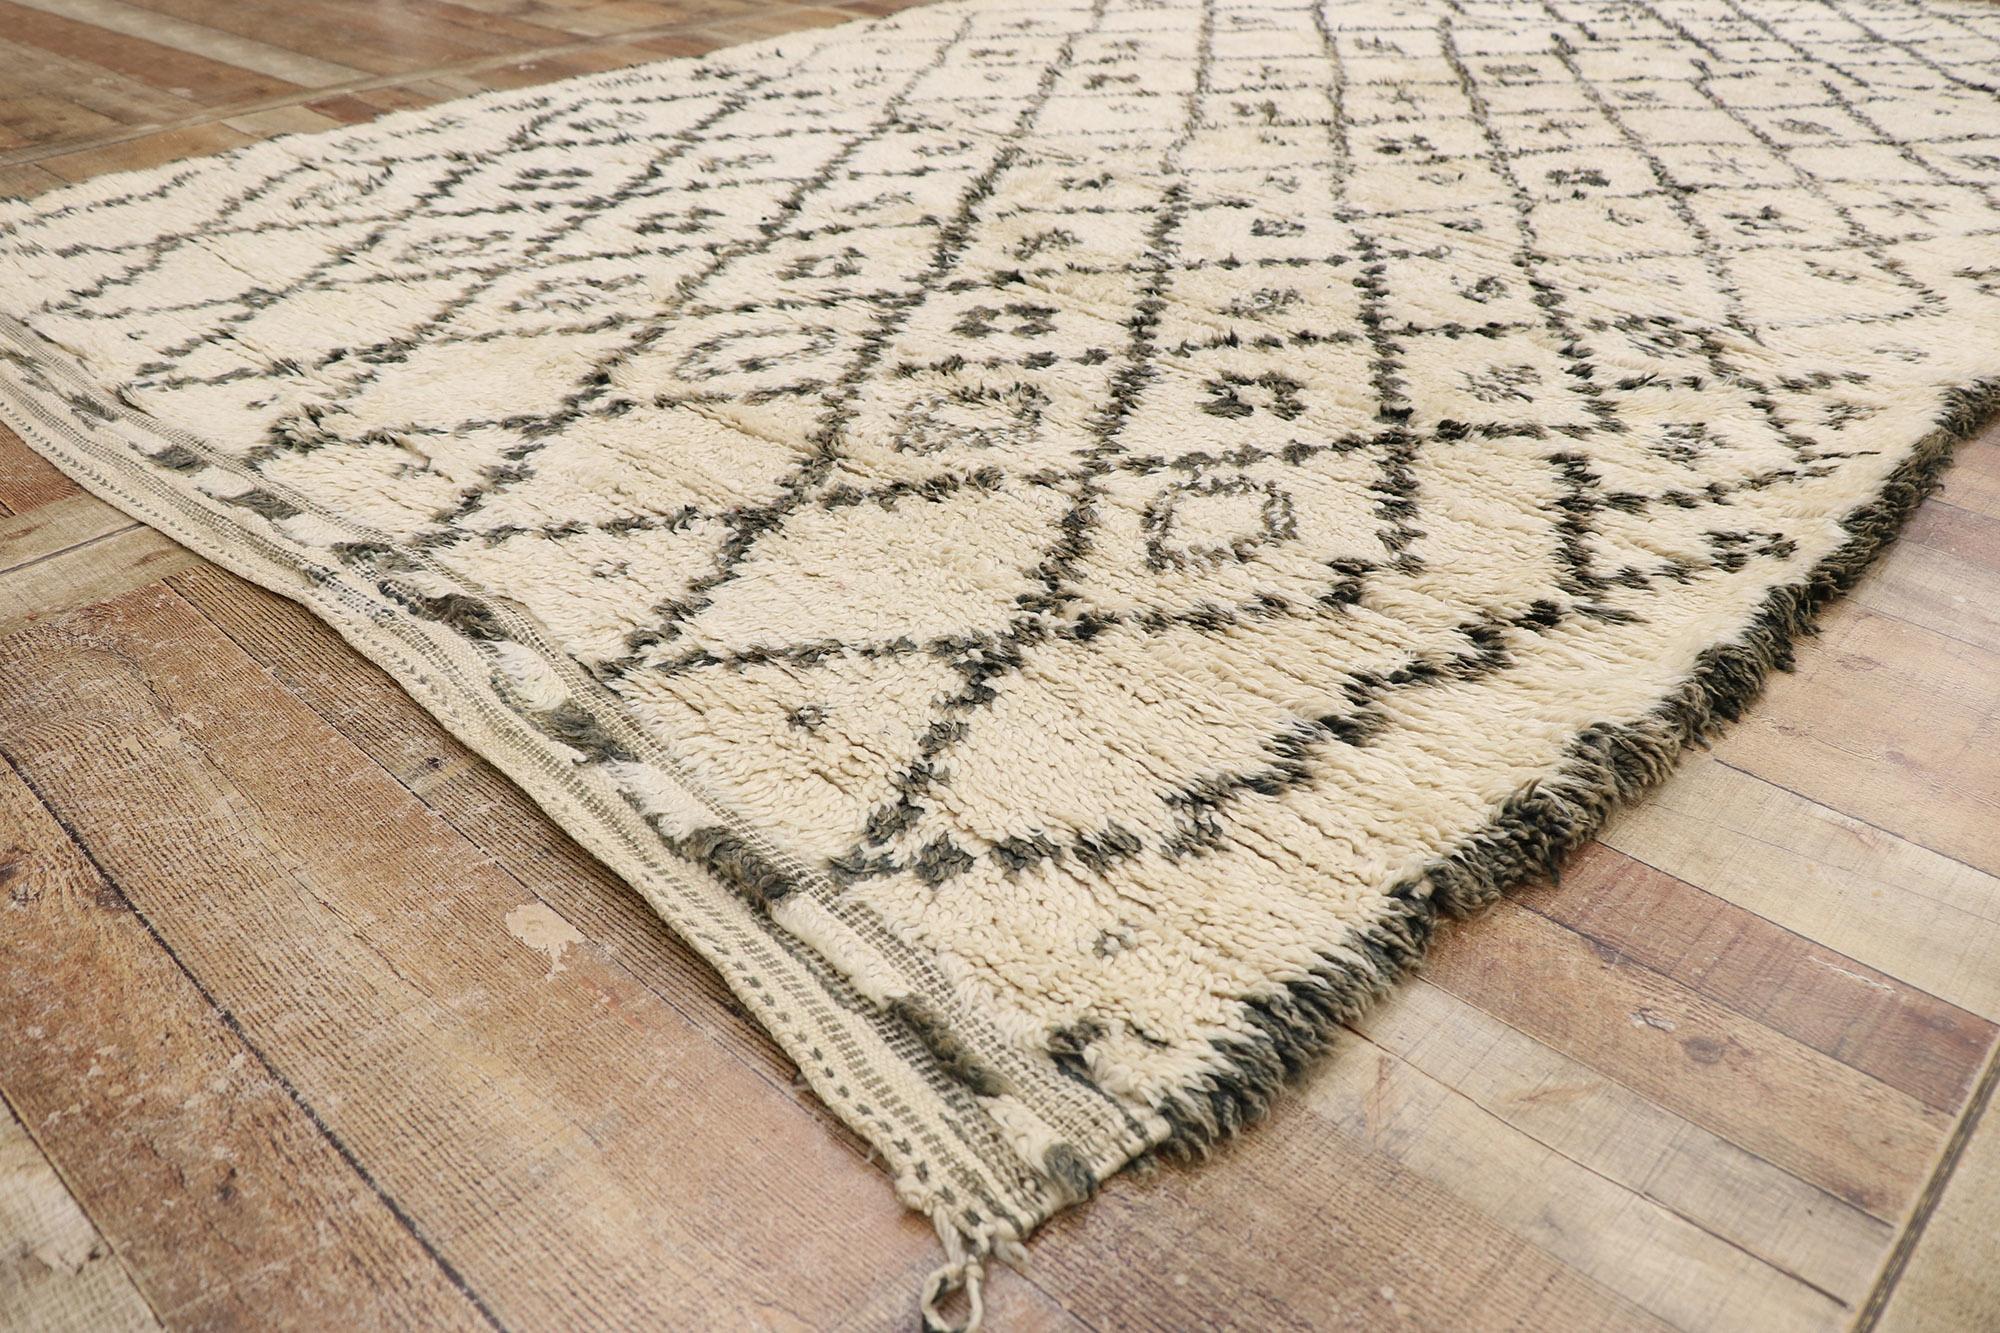 Wool Vintage Berber Beni Ourain Moroccan Rug with Tribal Style For Sale